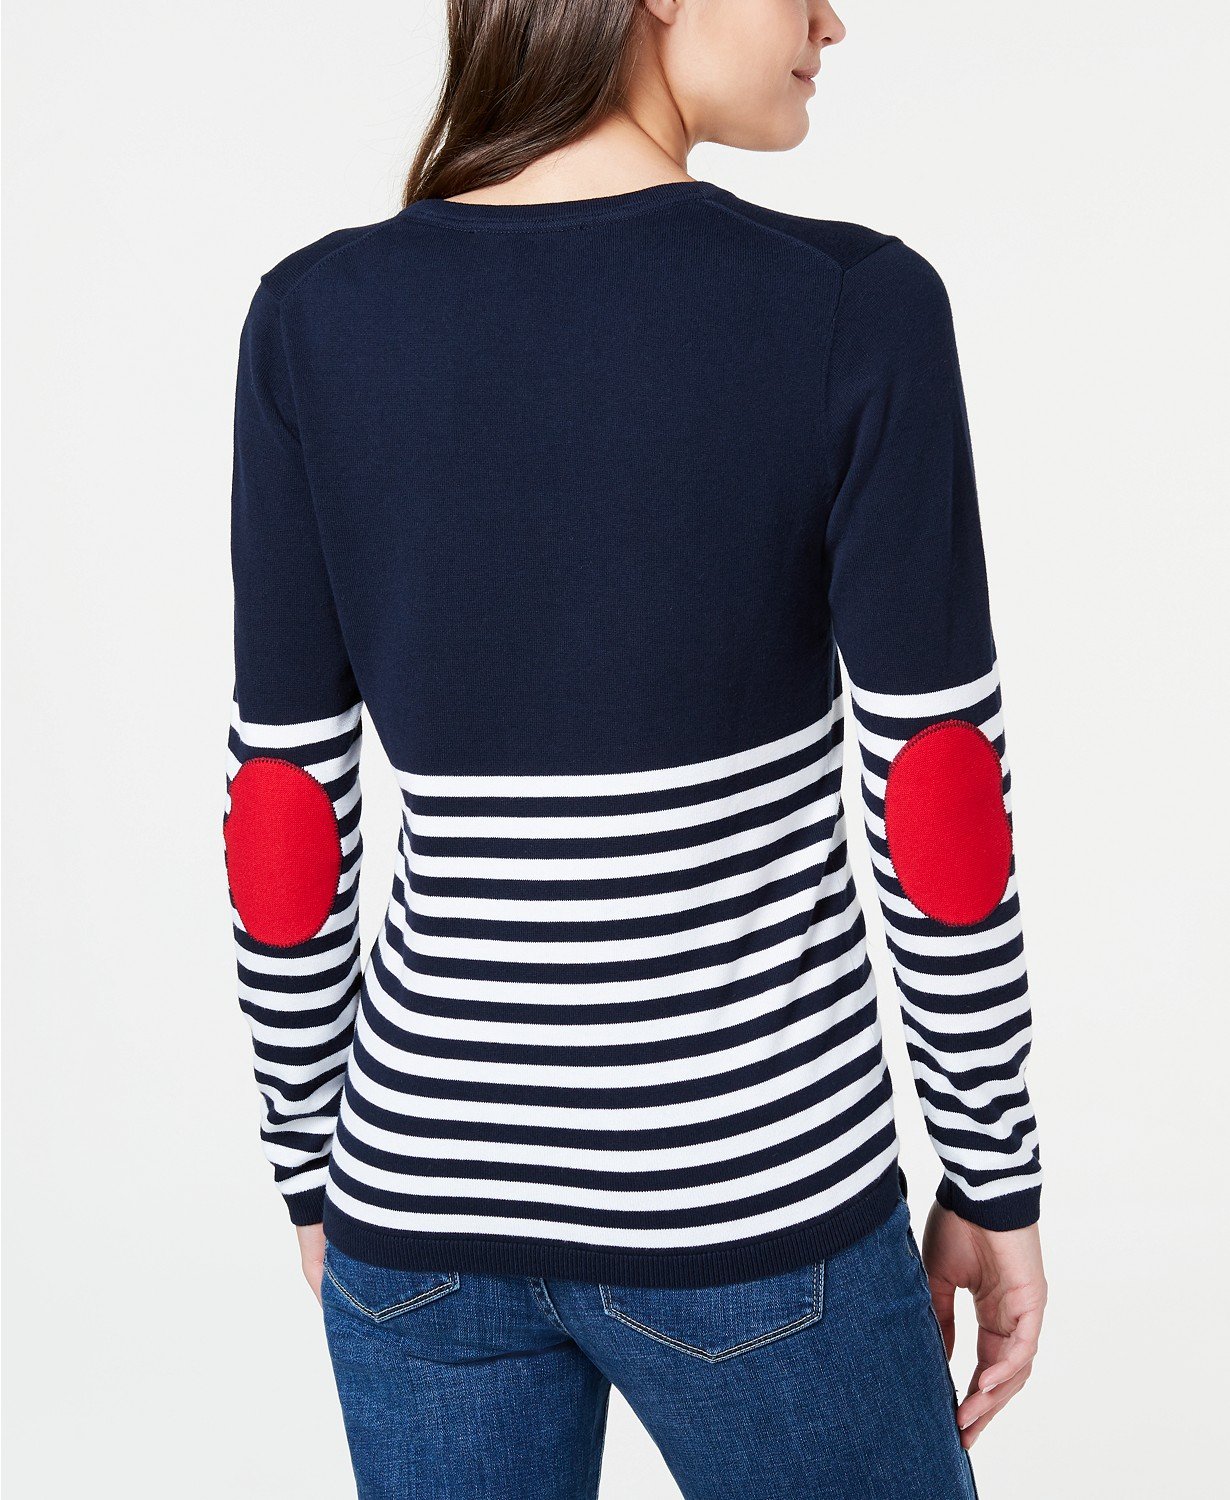 Tommy Hilfiger Patch Elbow Colorblocked Sweater - TopLine Fashion Lounge